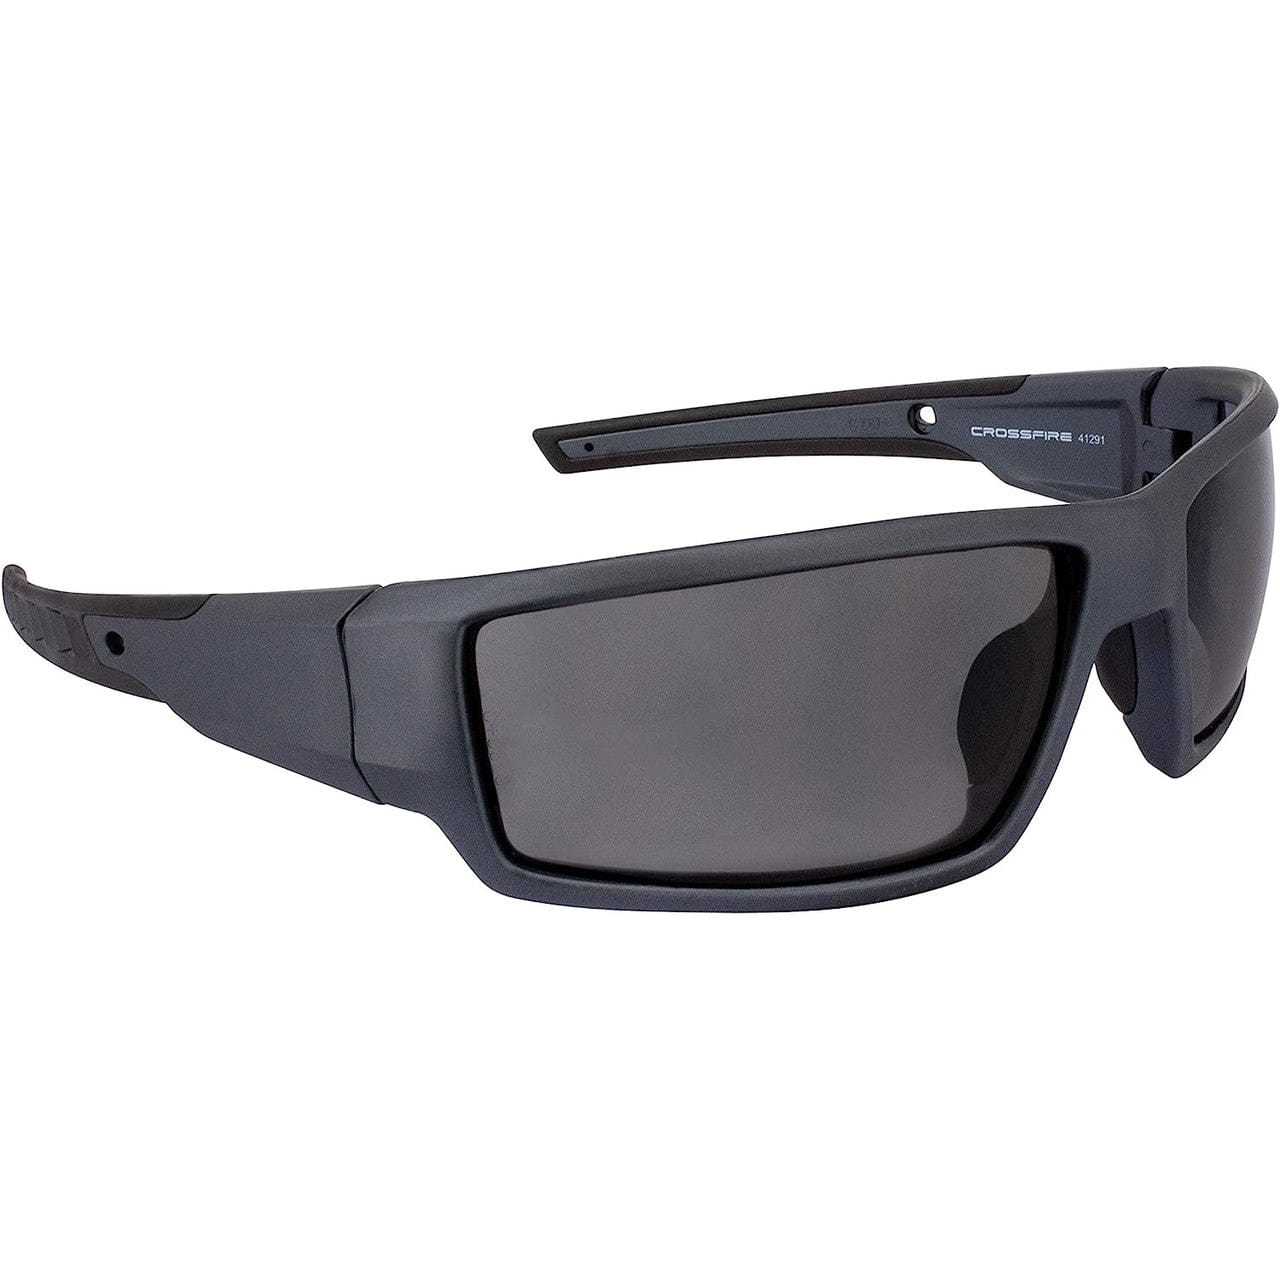 Crossfire Cumulus 41291 Safety Glasses Profile View